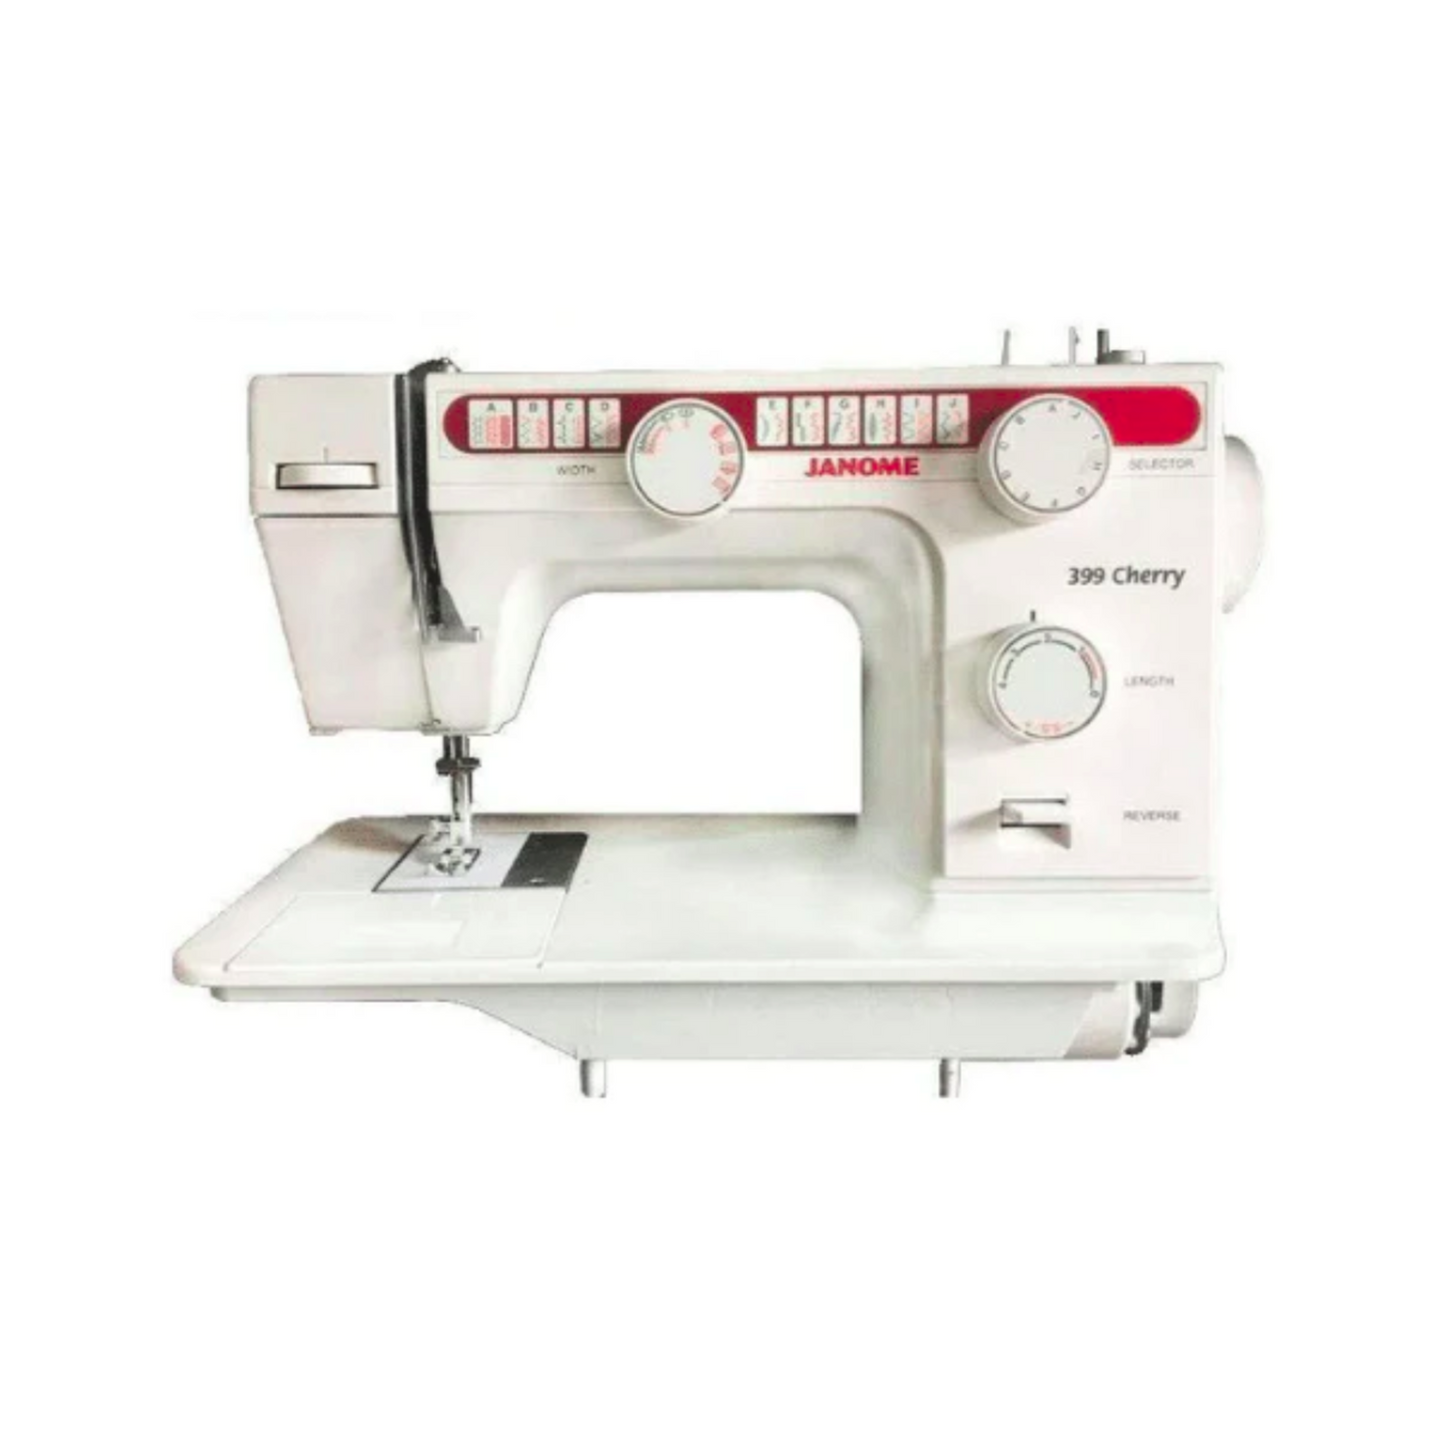 Janome 399 cherry - Sewing machine - White - Front view